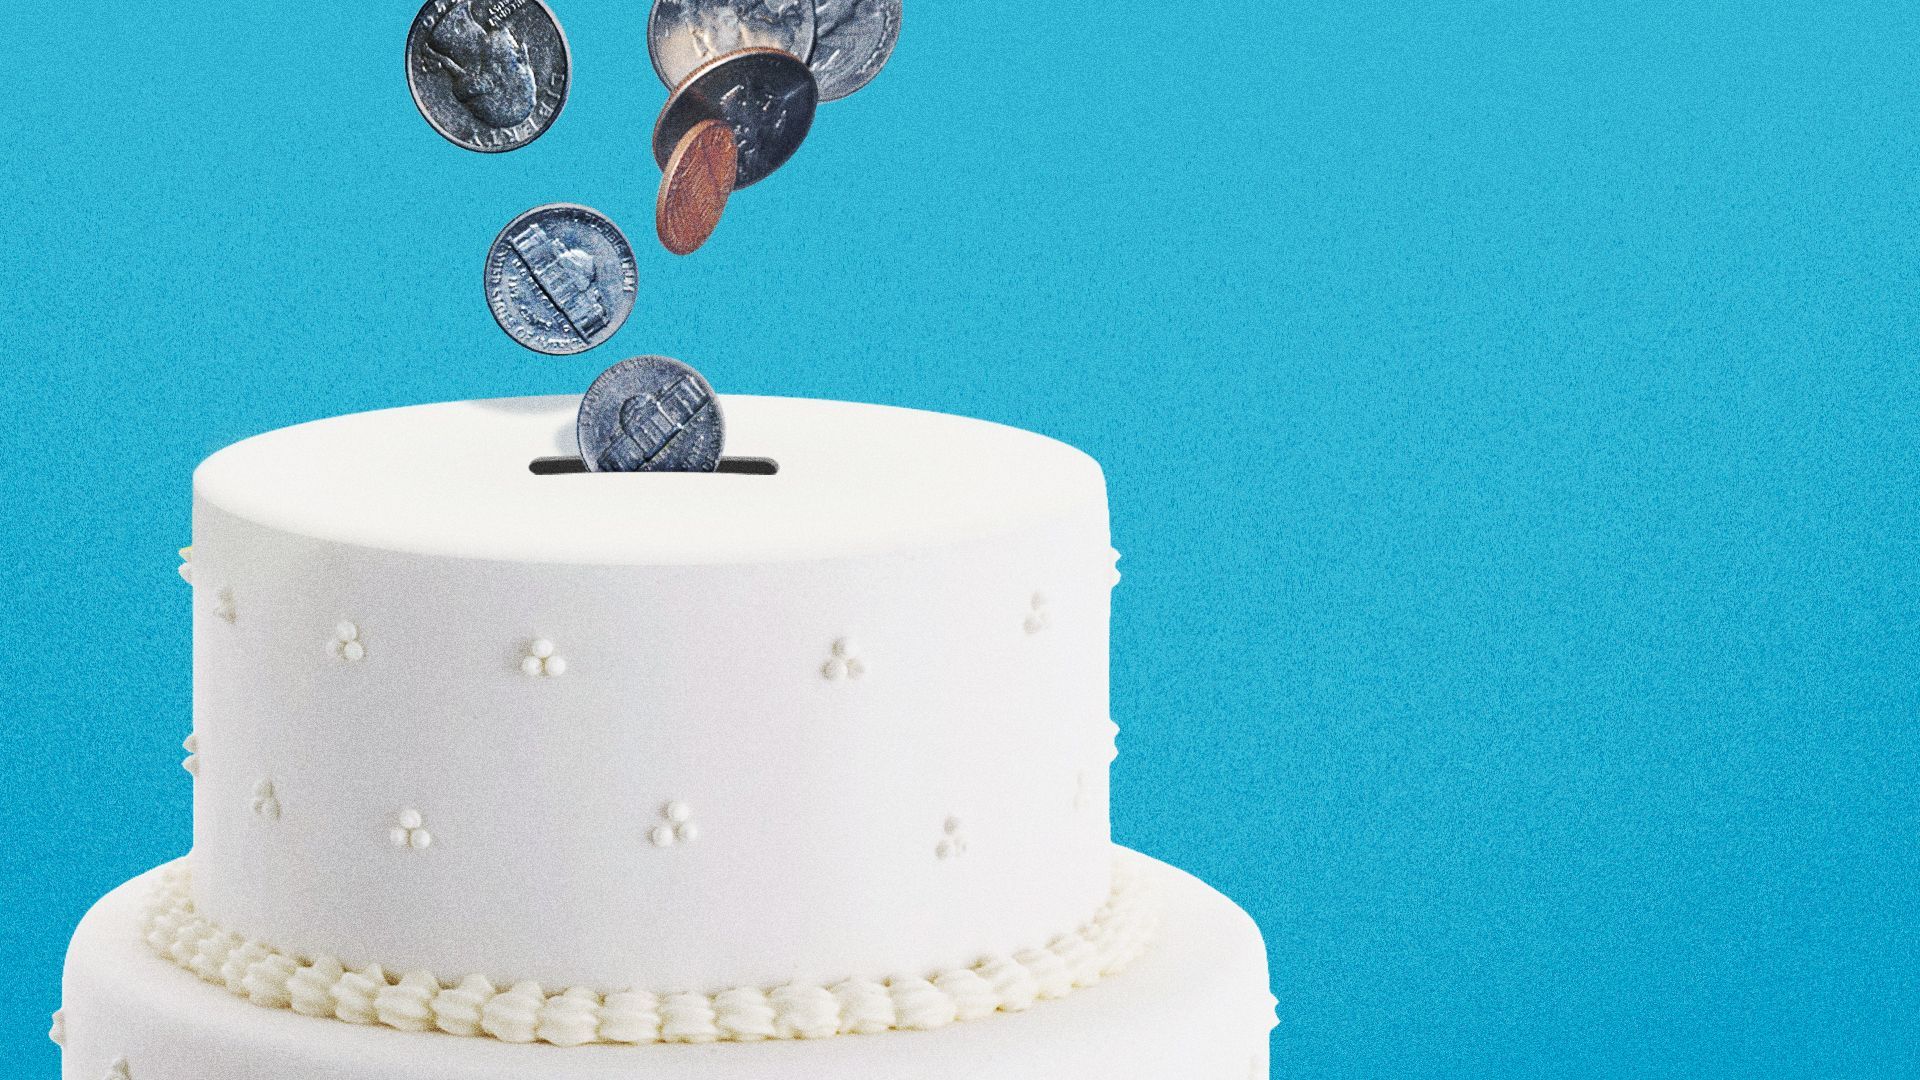 Illustration of coins falling into a cake as if it were a piggy bank.